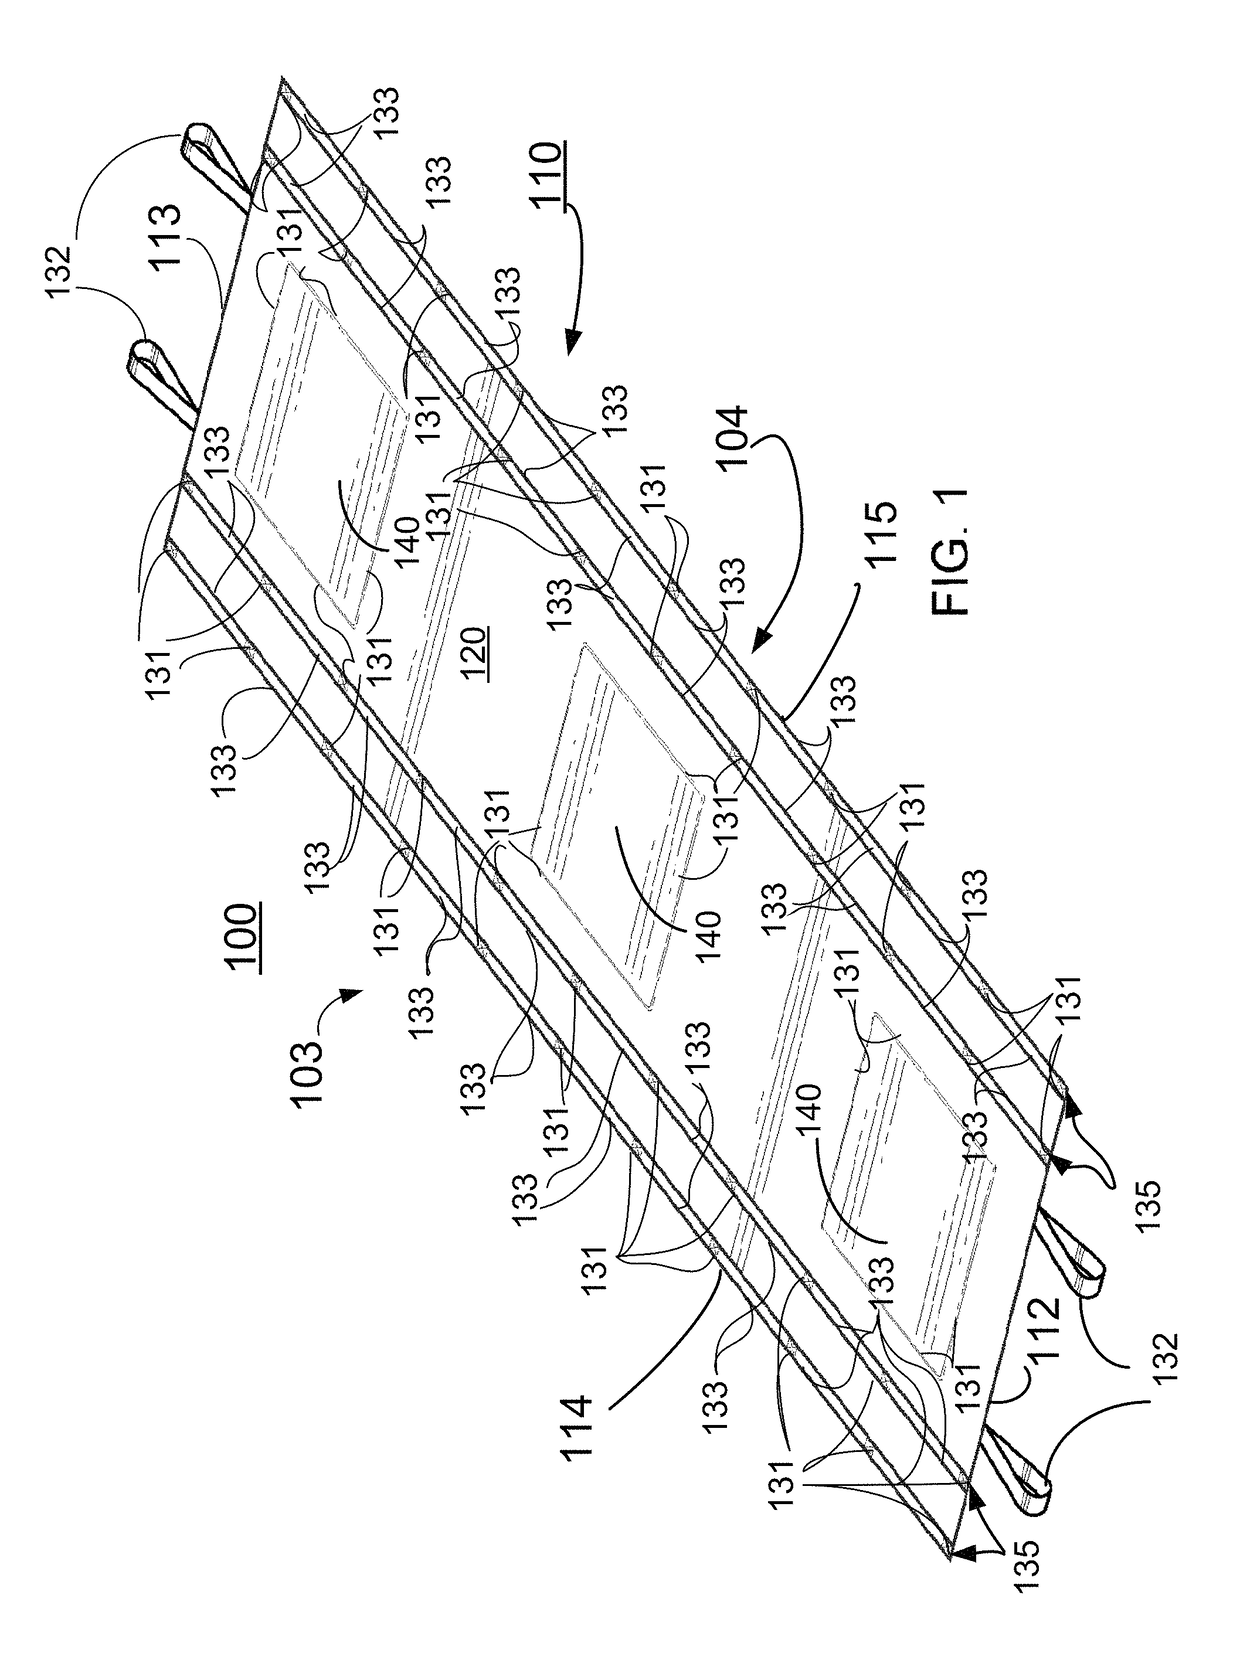 Apparatus, system and kit for rapidly moving a non-ambulatory person and/or object